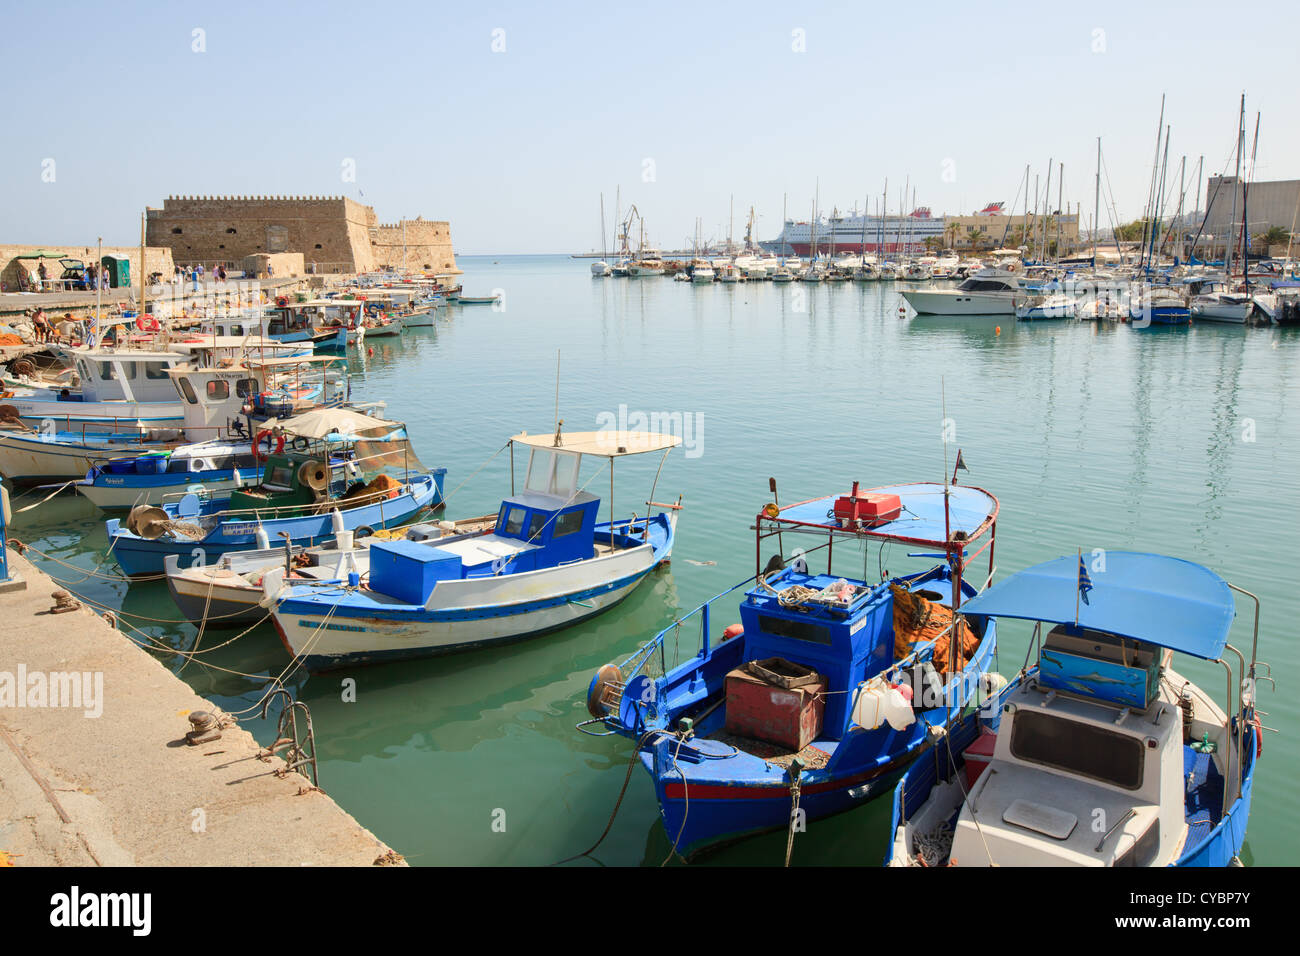 Venetian Fortress and fishing boats at Heraklion Harbour harbor on the Greek island of Crete, Greece. Stock Photo